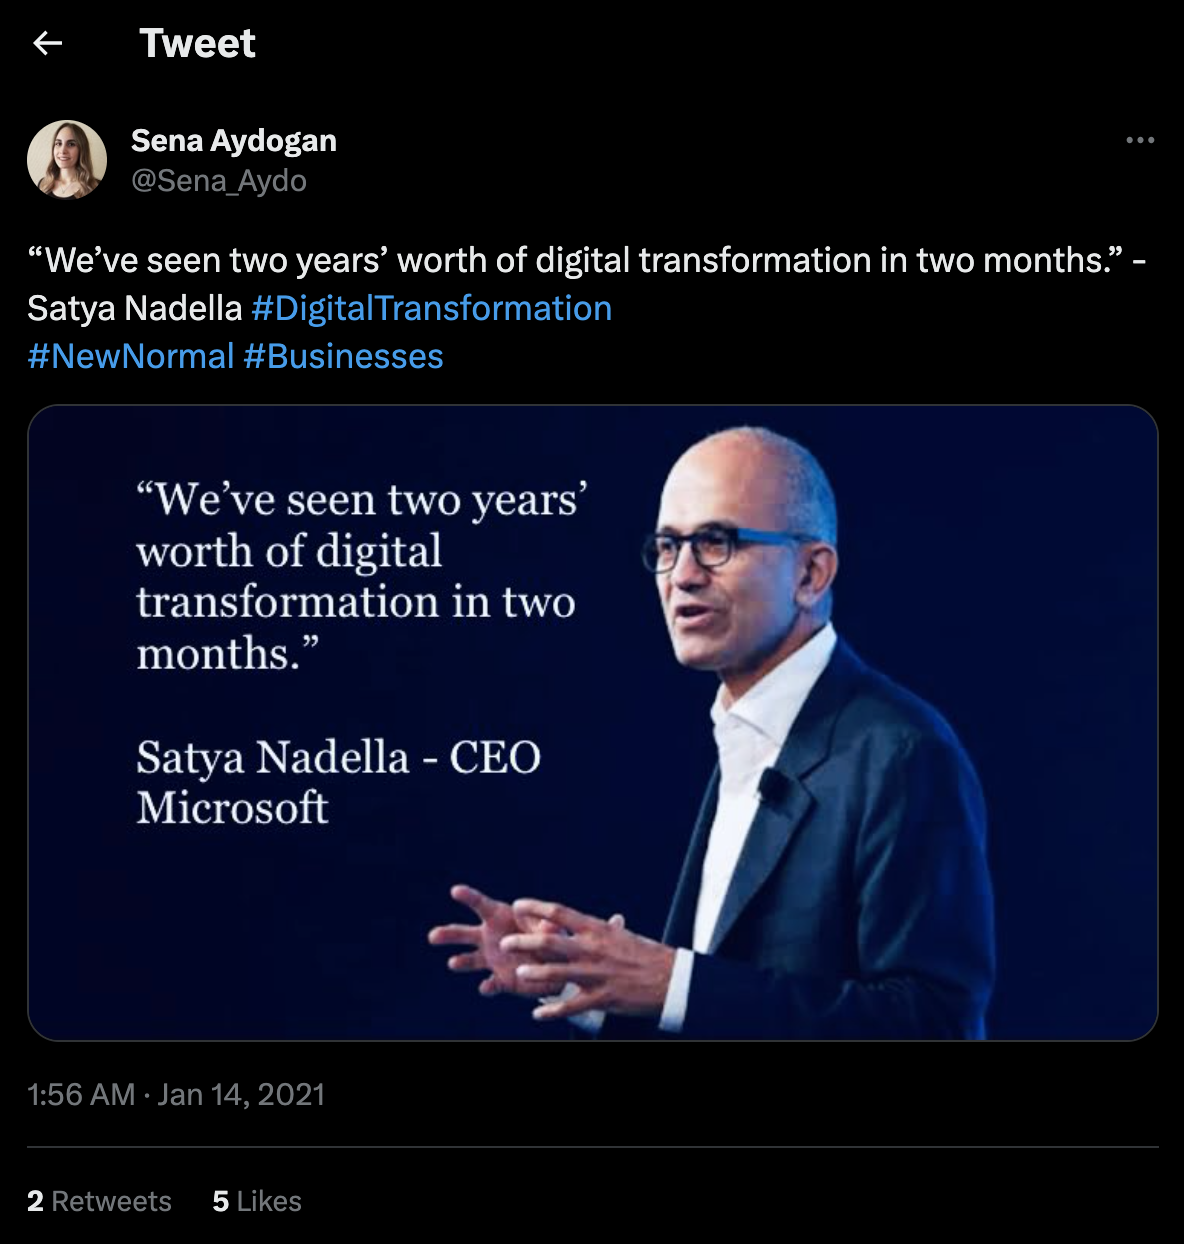 A tweet reiterating Satya Nadella-s famous words from 2020.